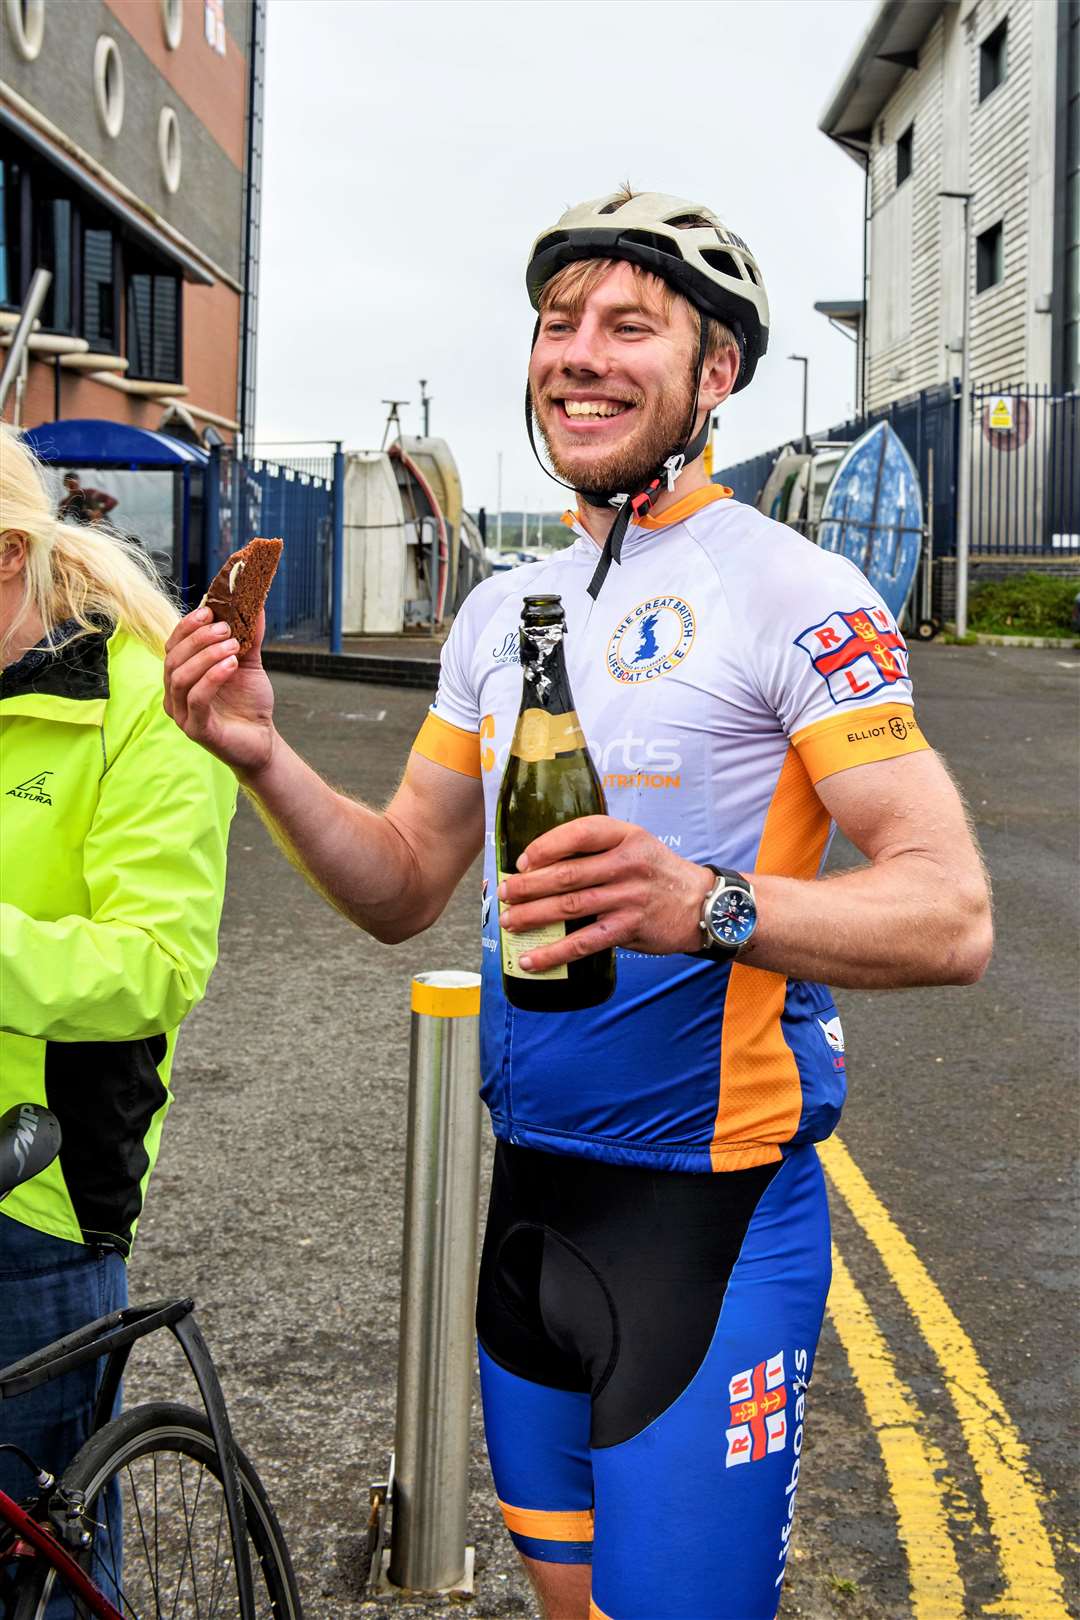 Harry celebrates with cake and champagne at the finish point in Dorset. Picture: PhotographySquared